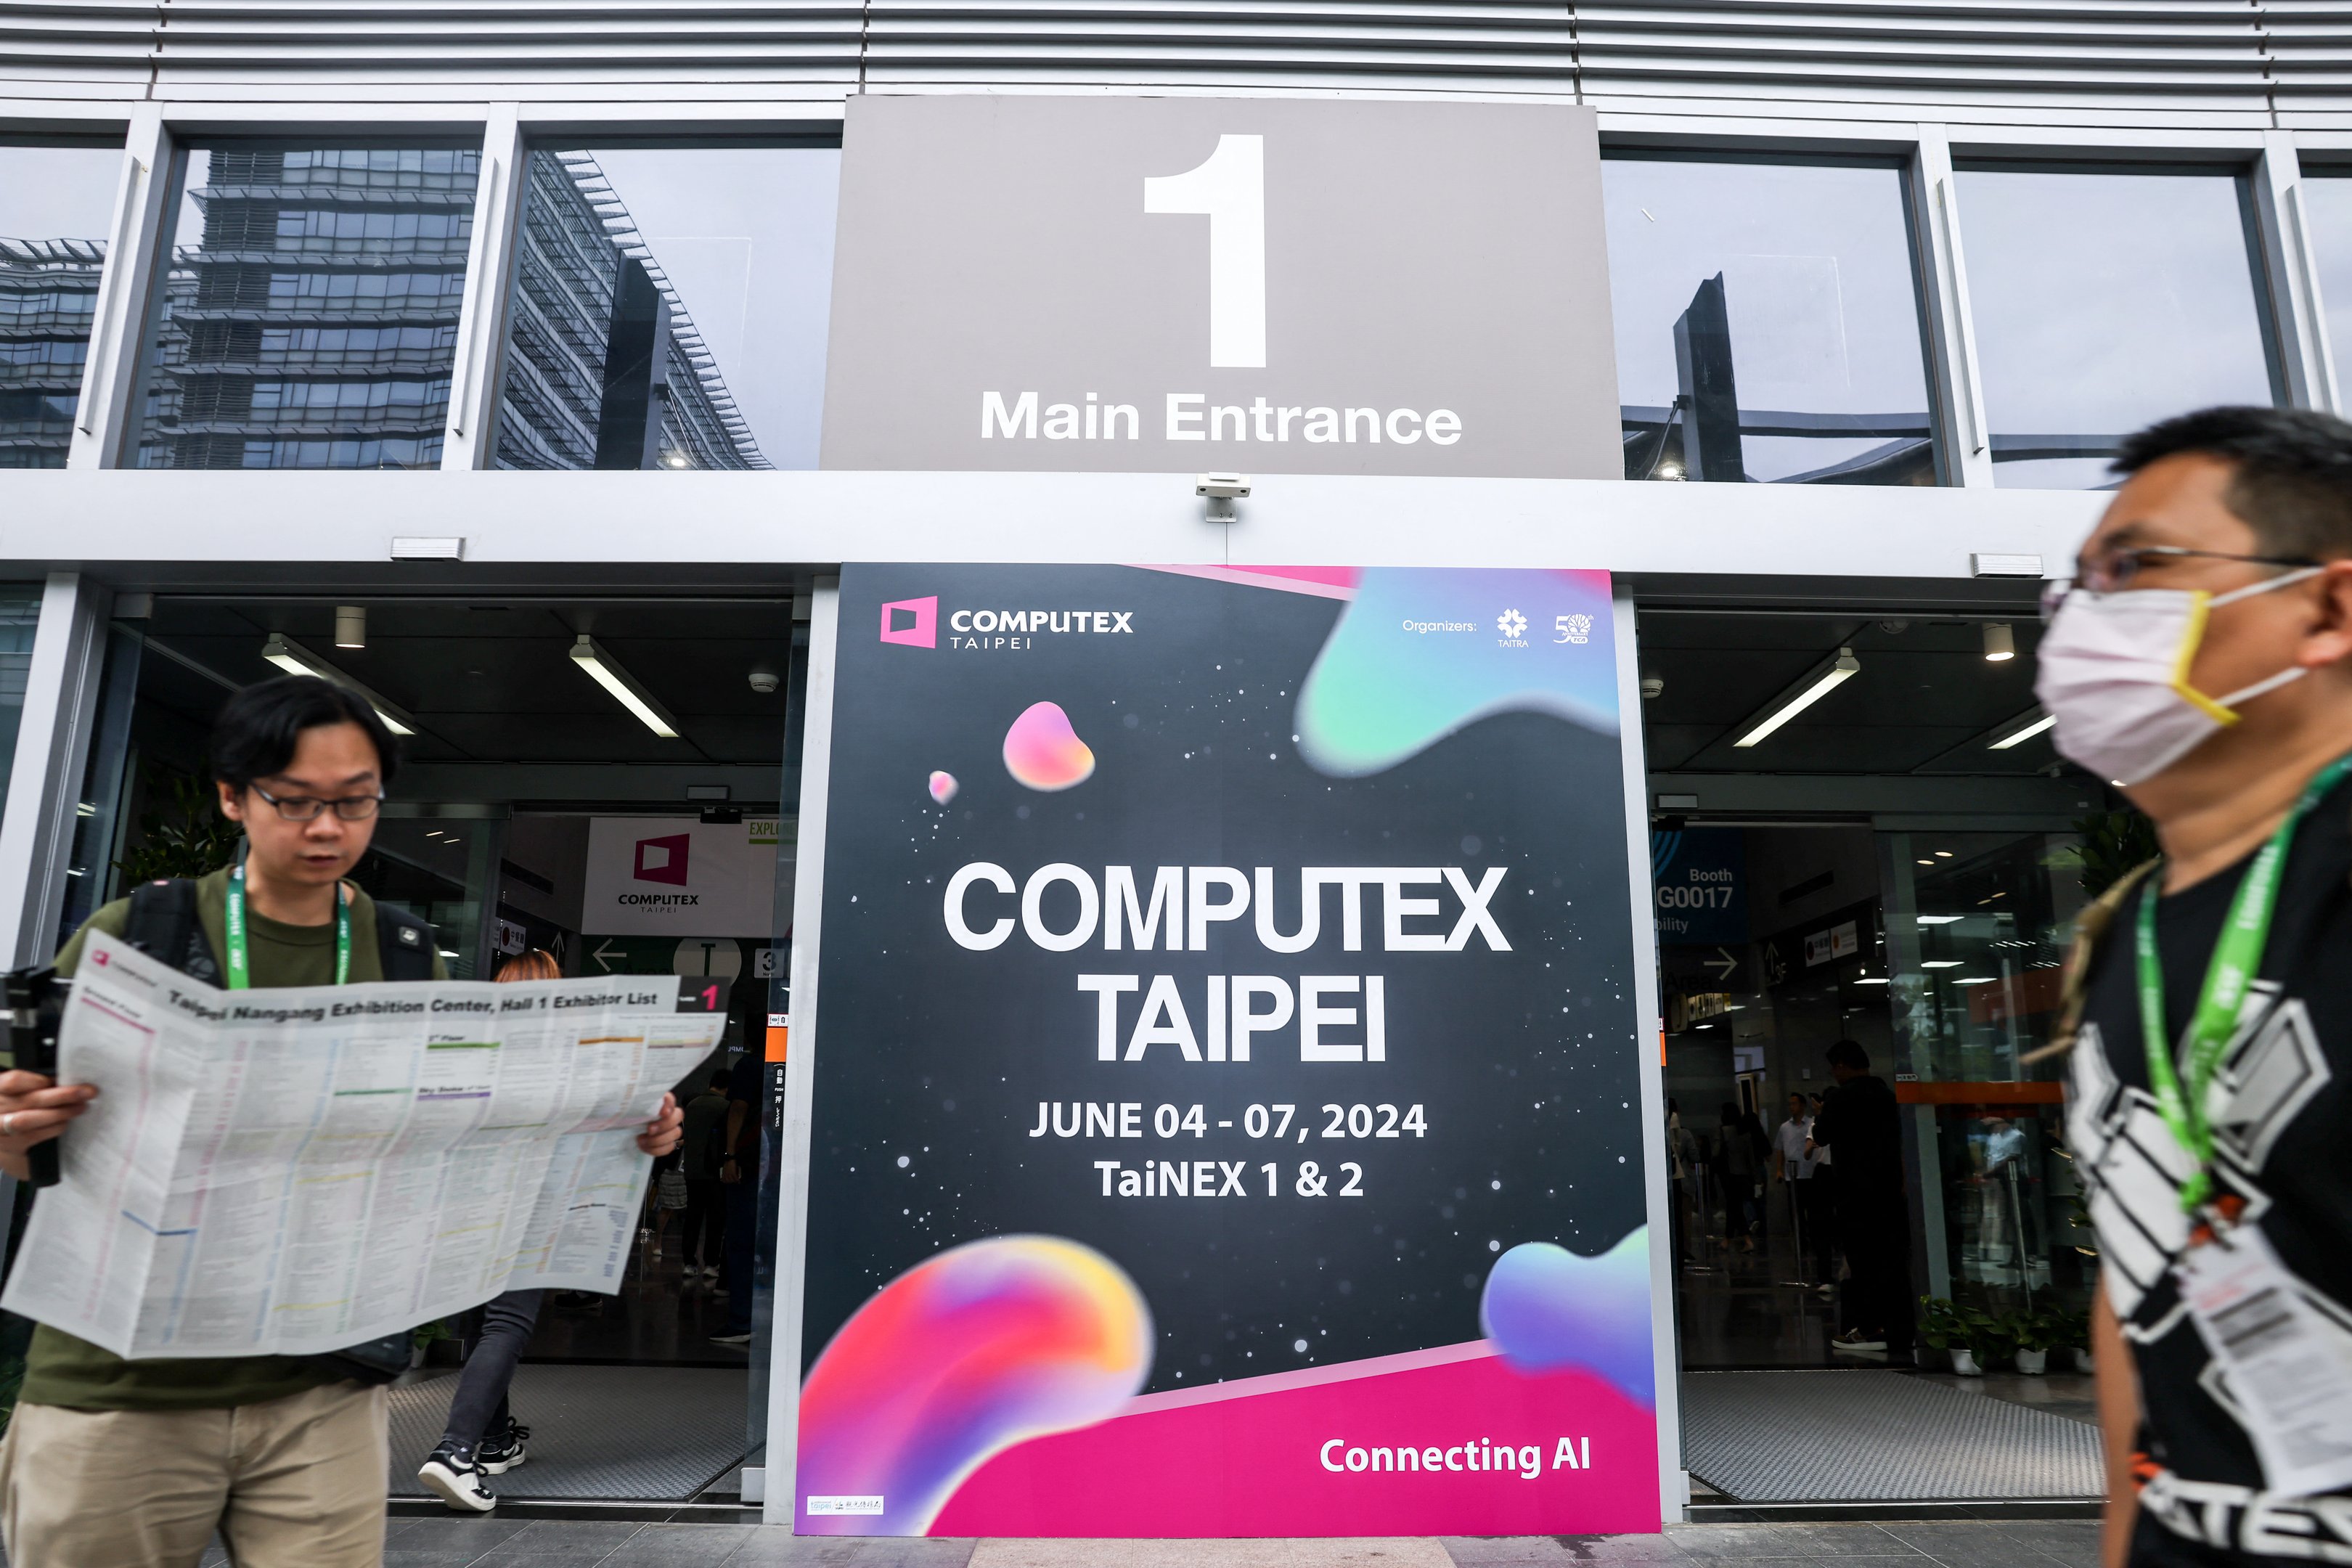 A visitor looks at a map during Computex 2024 in Taipei on June 4, 2024. (Photo by I-Hwa CHENG / AFP) (Photo by I-HWA CHENG/AFP via Getty Images)